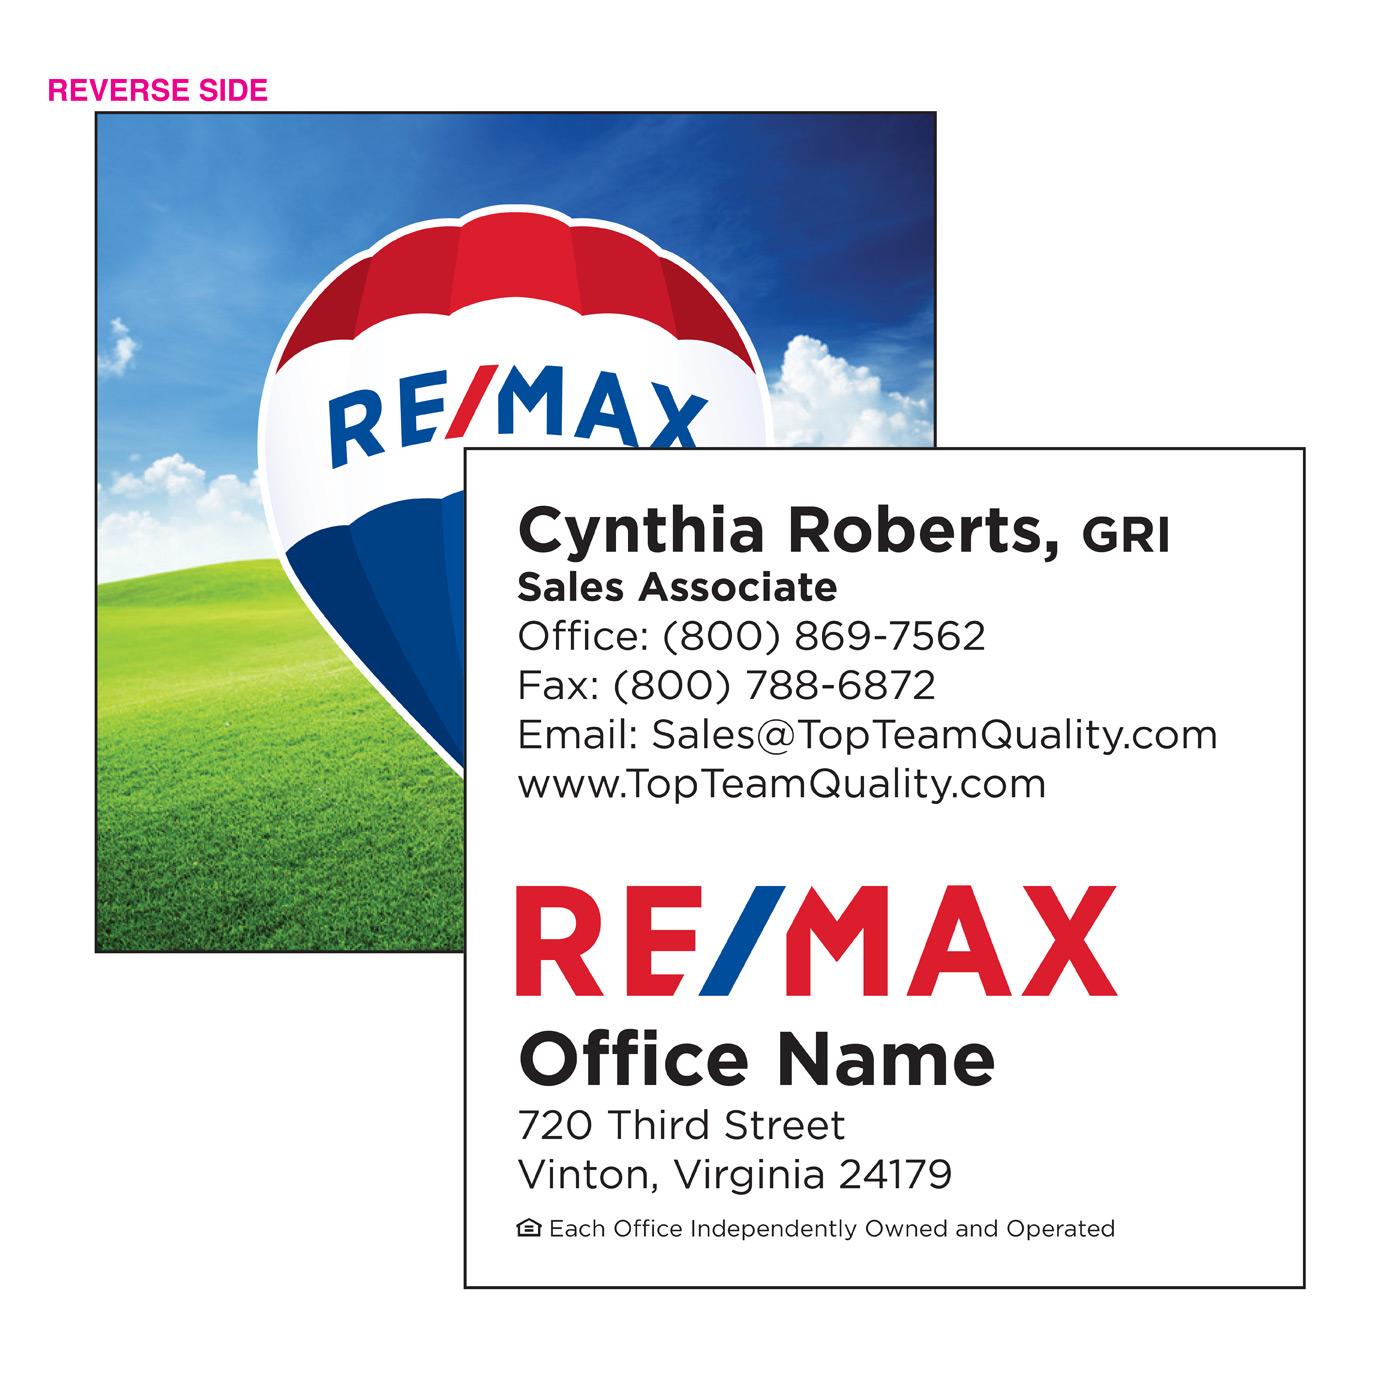 RE/MAX Square Business Card